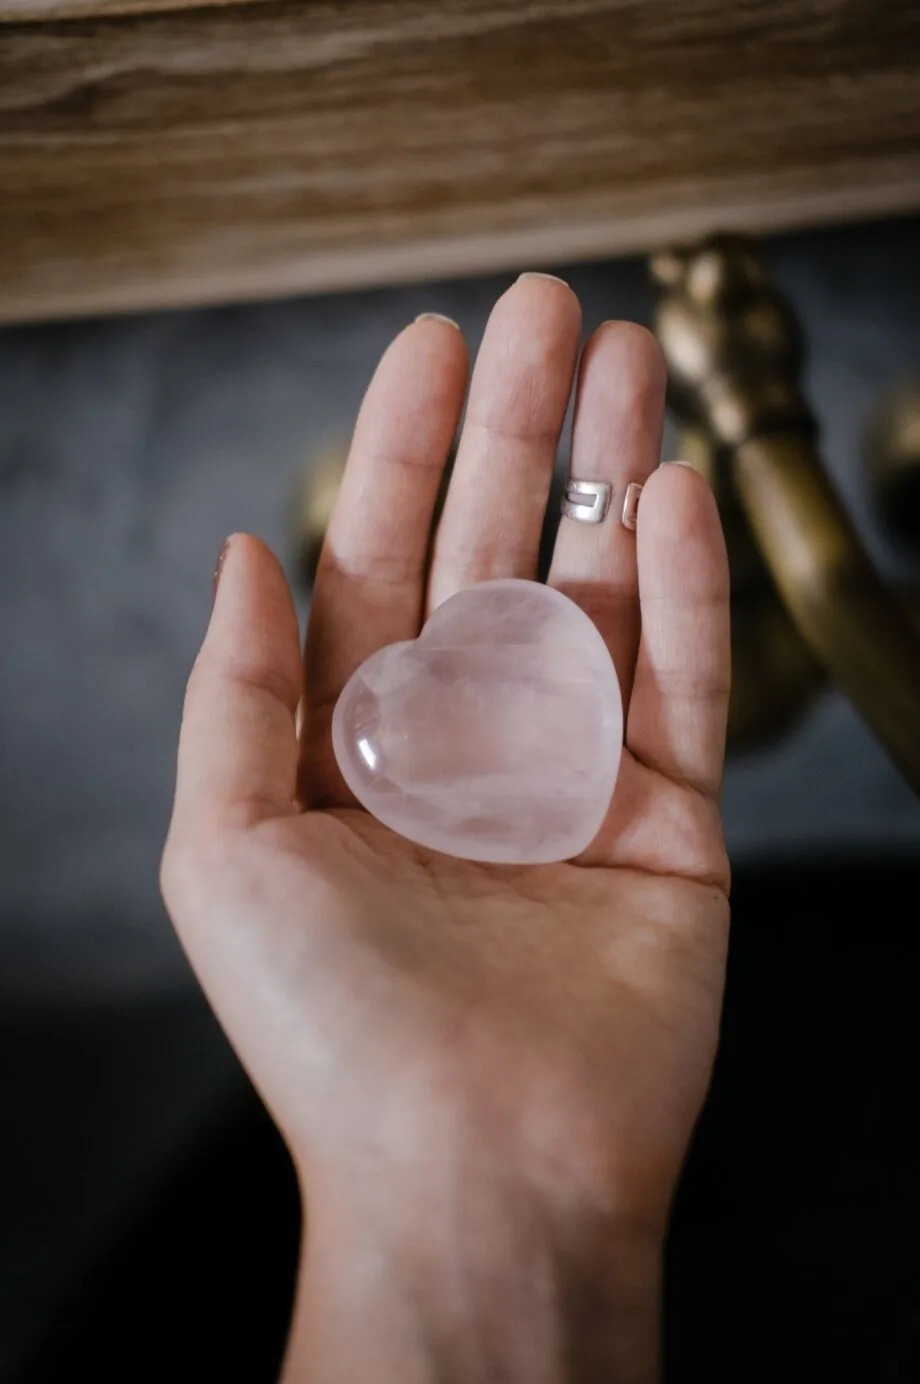 Discover the properties of rose quartz and how they can benefit you. Enhance your heart chakra and bring more peace and tranquility to your life with rose quartz affirmations.